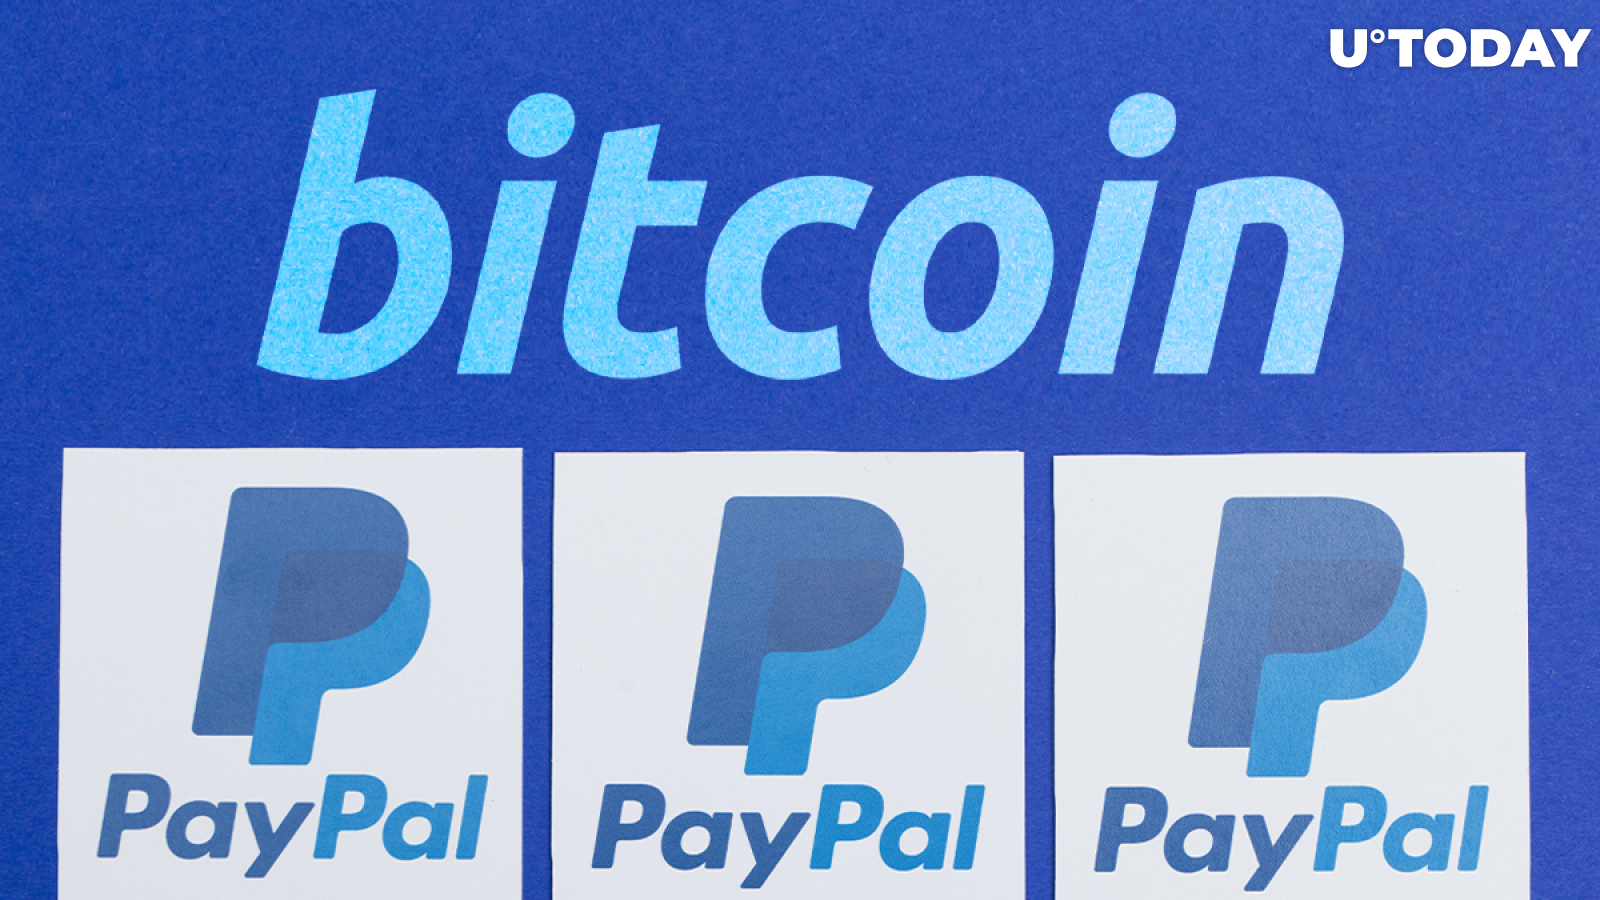 PayPal Plans to Benefit from Bitcoin Looking at Cash App, Here’s How